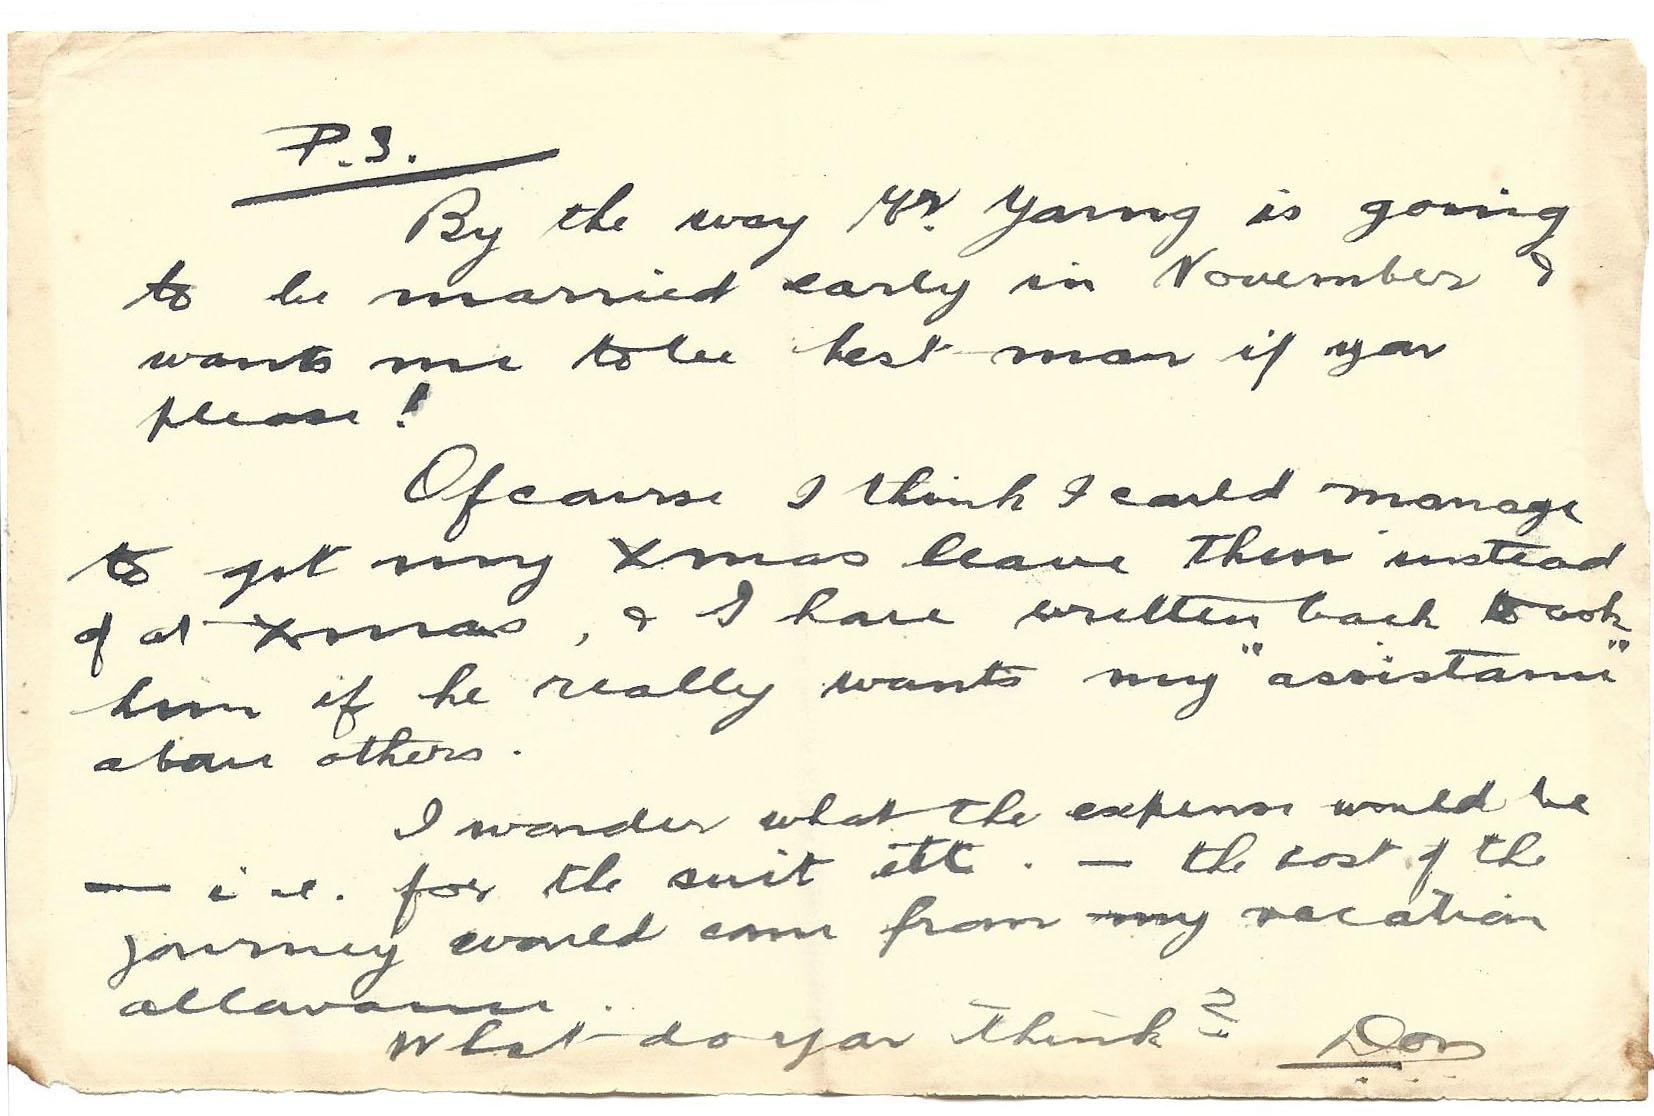 1920-09-26 p3 Donald Bearman letter to his father